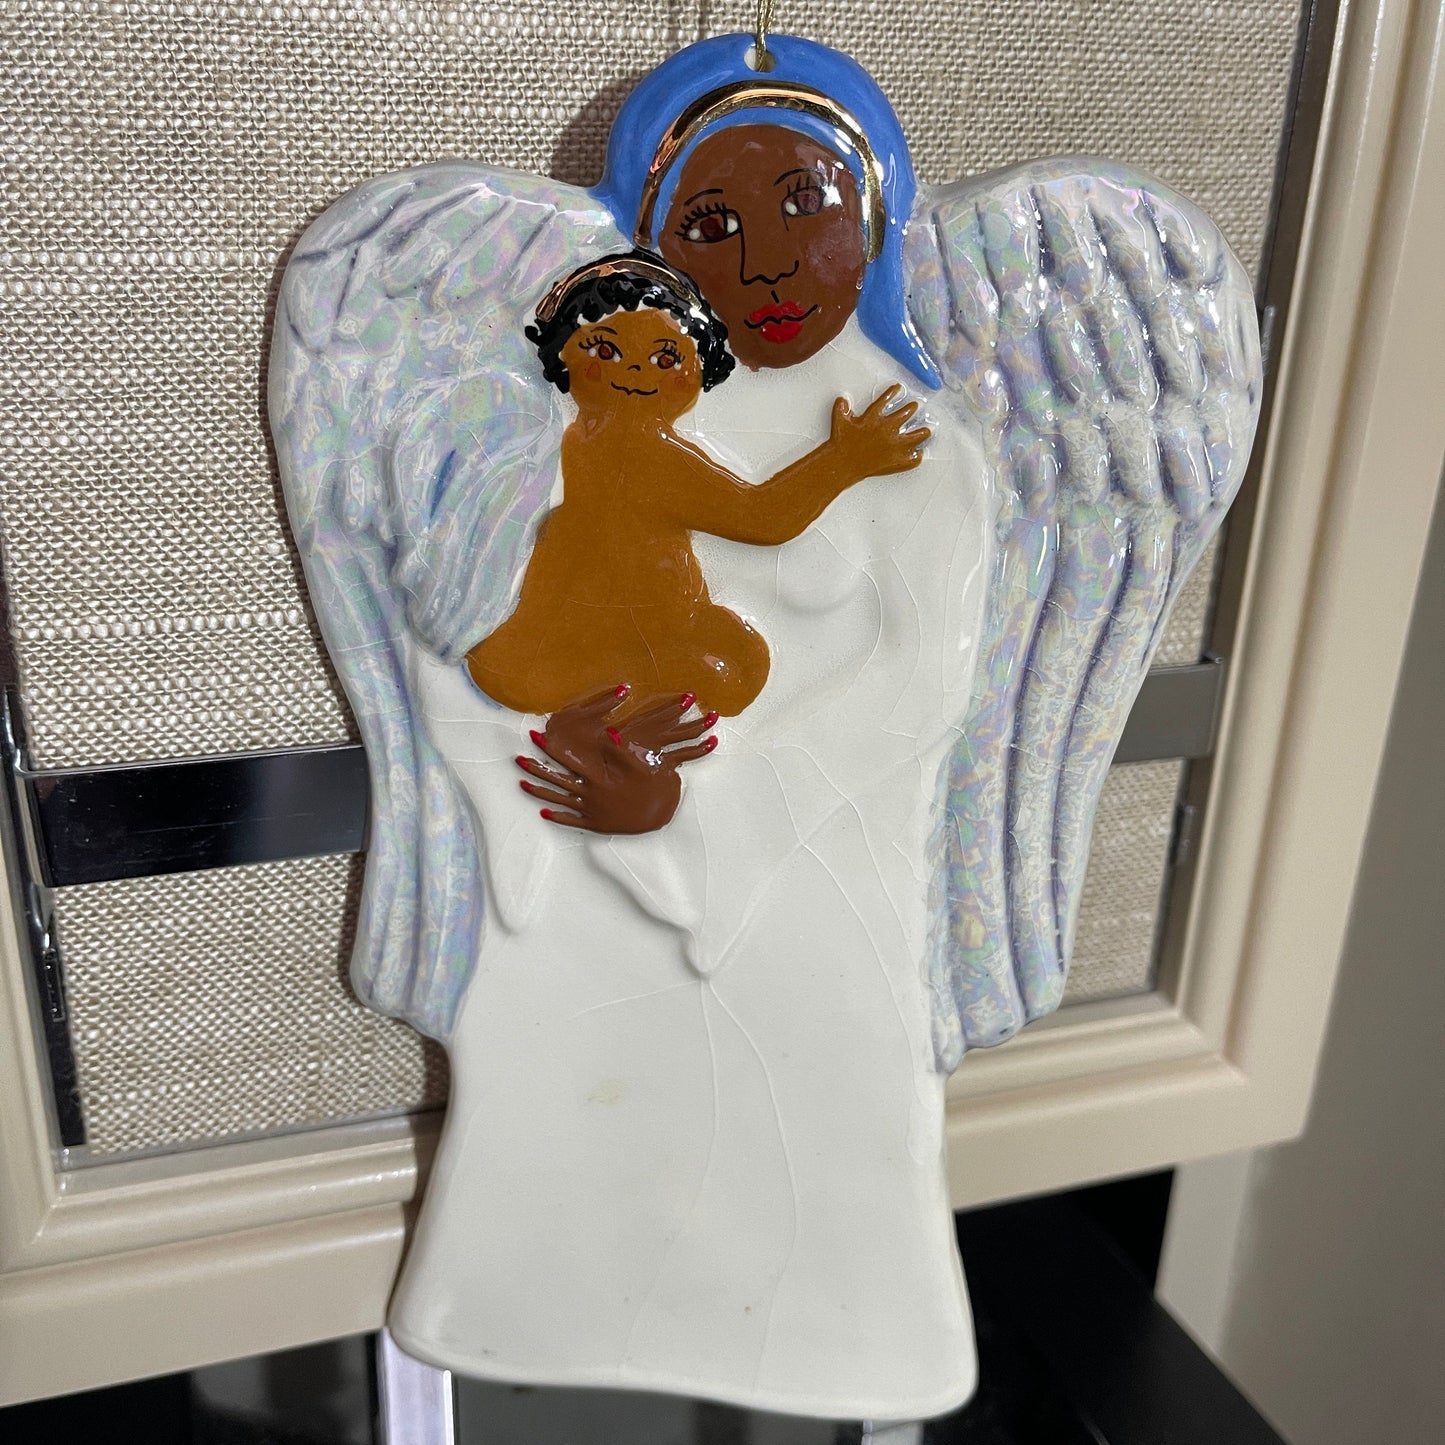 Angel holding Angel child 7 inch tall painted and glazed ceramic vintage ornament